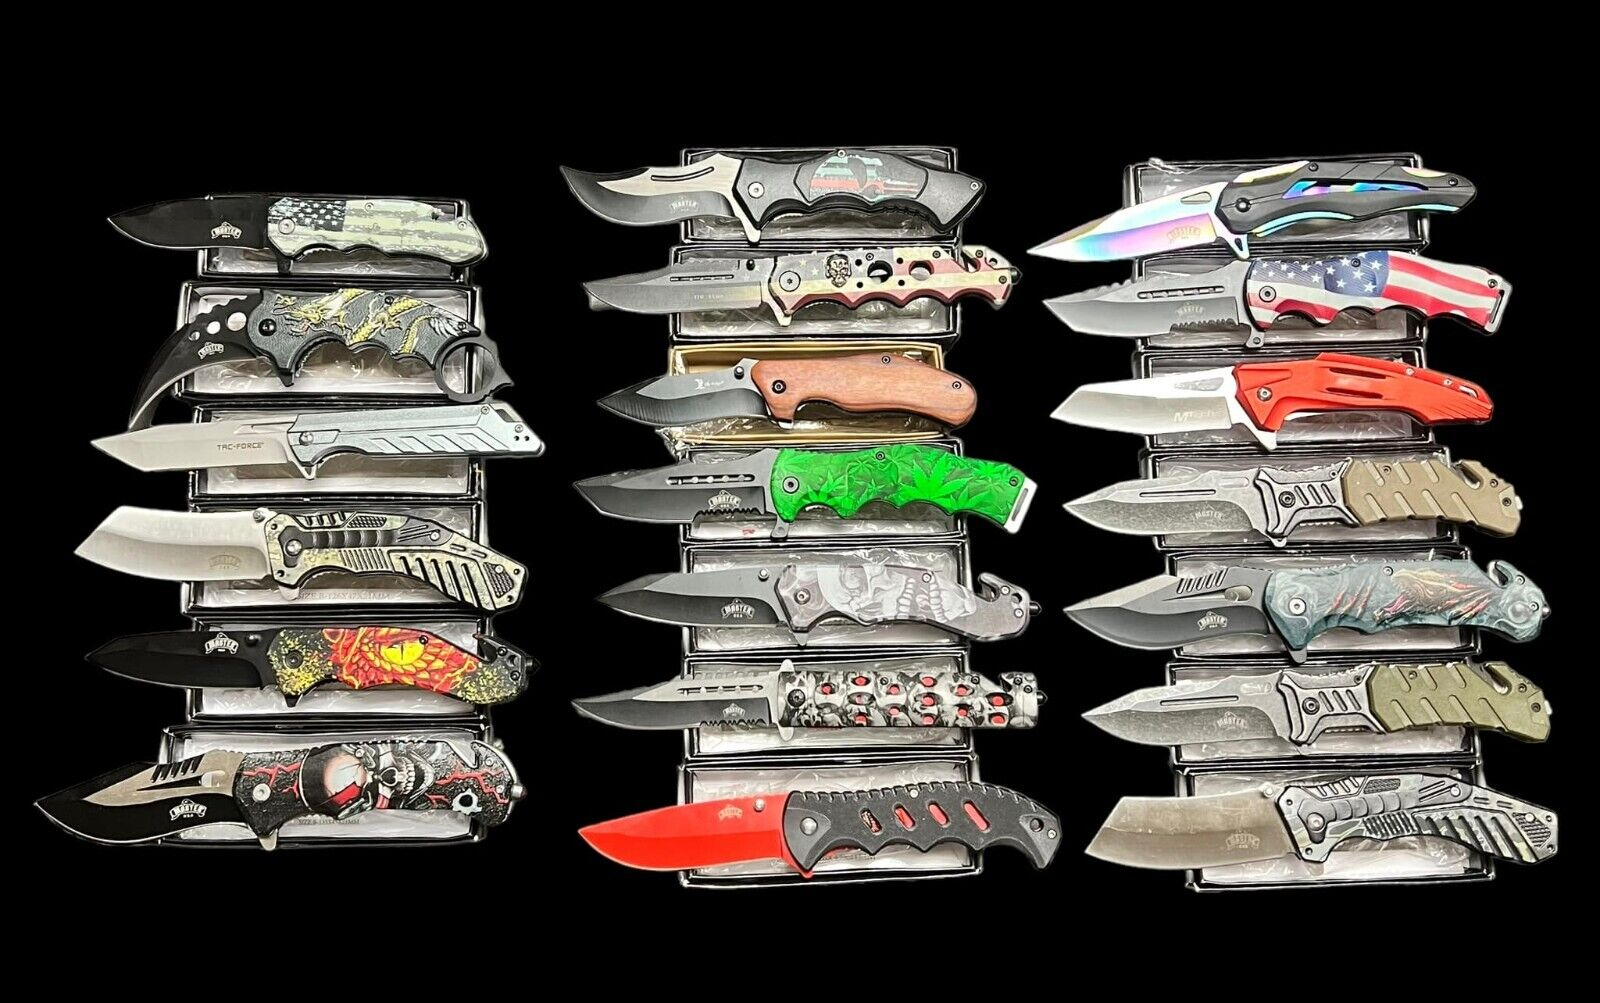 LOT OF 45 Spring Assisted pocket knife Collectible Design Wholesale Knives AS-IS Без бренда - фотография #10